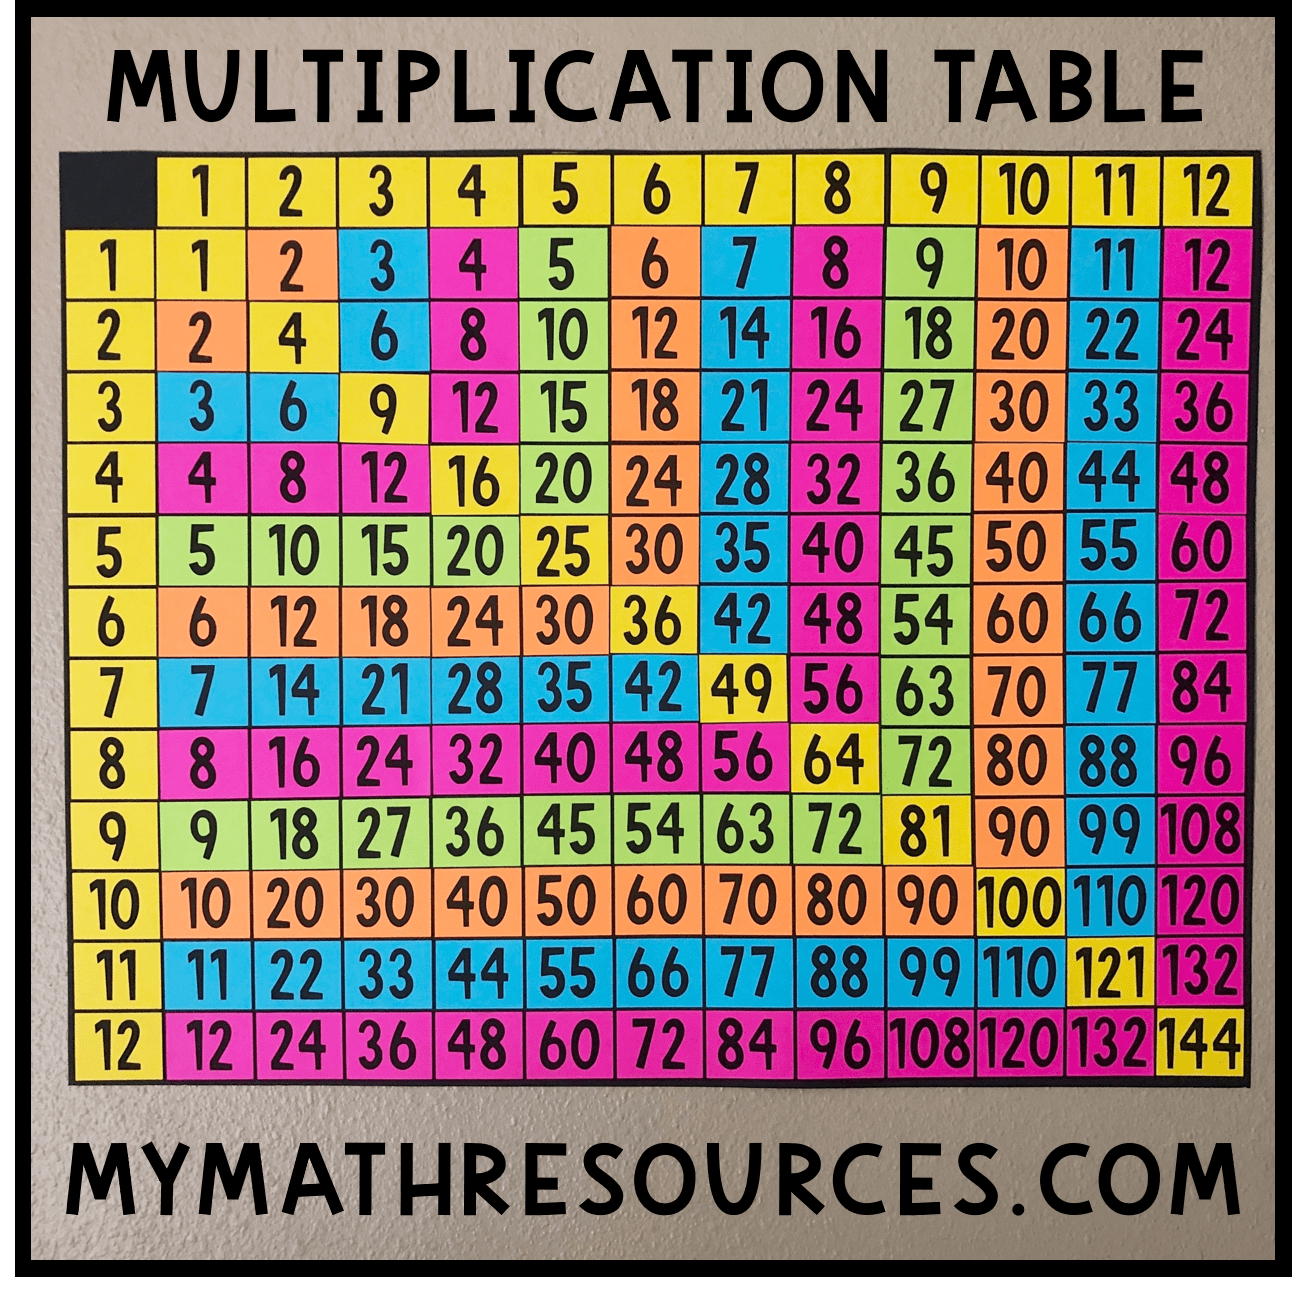 My Math Resources - Free Multiplication Table Poster